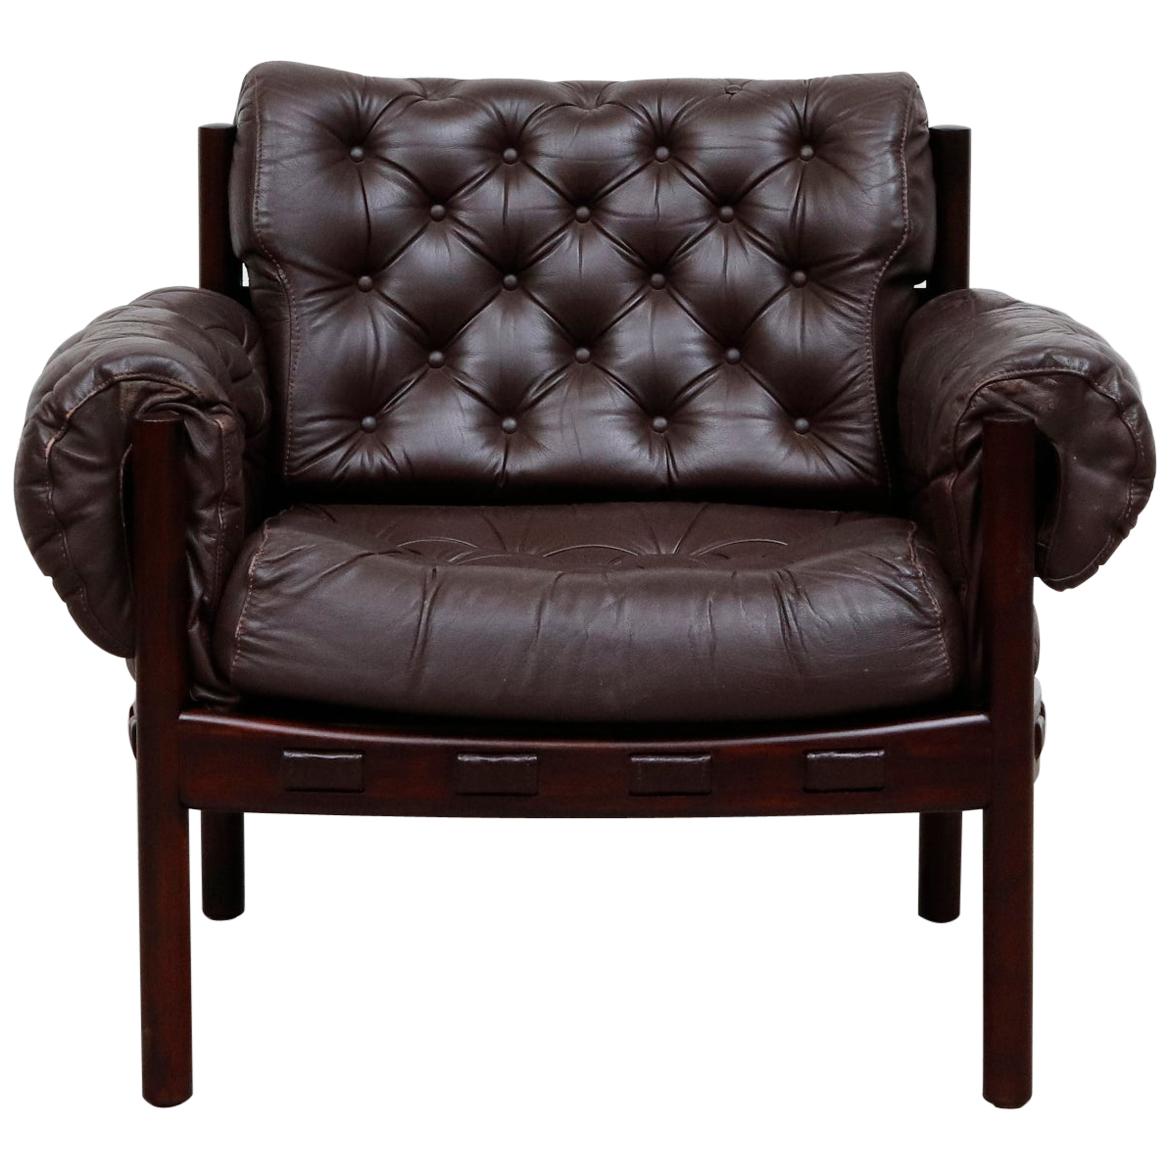 Arne Norell Style Tufted Leather Lounge Chair by Sven Ellekaer for Coja